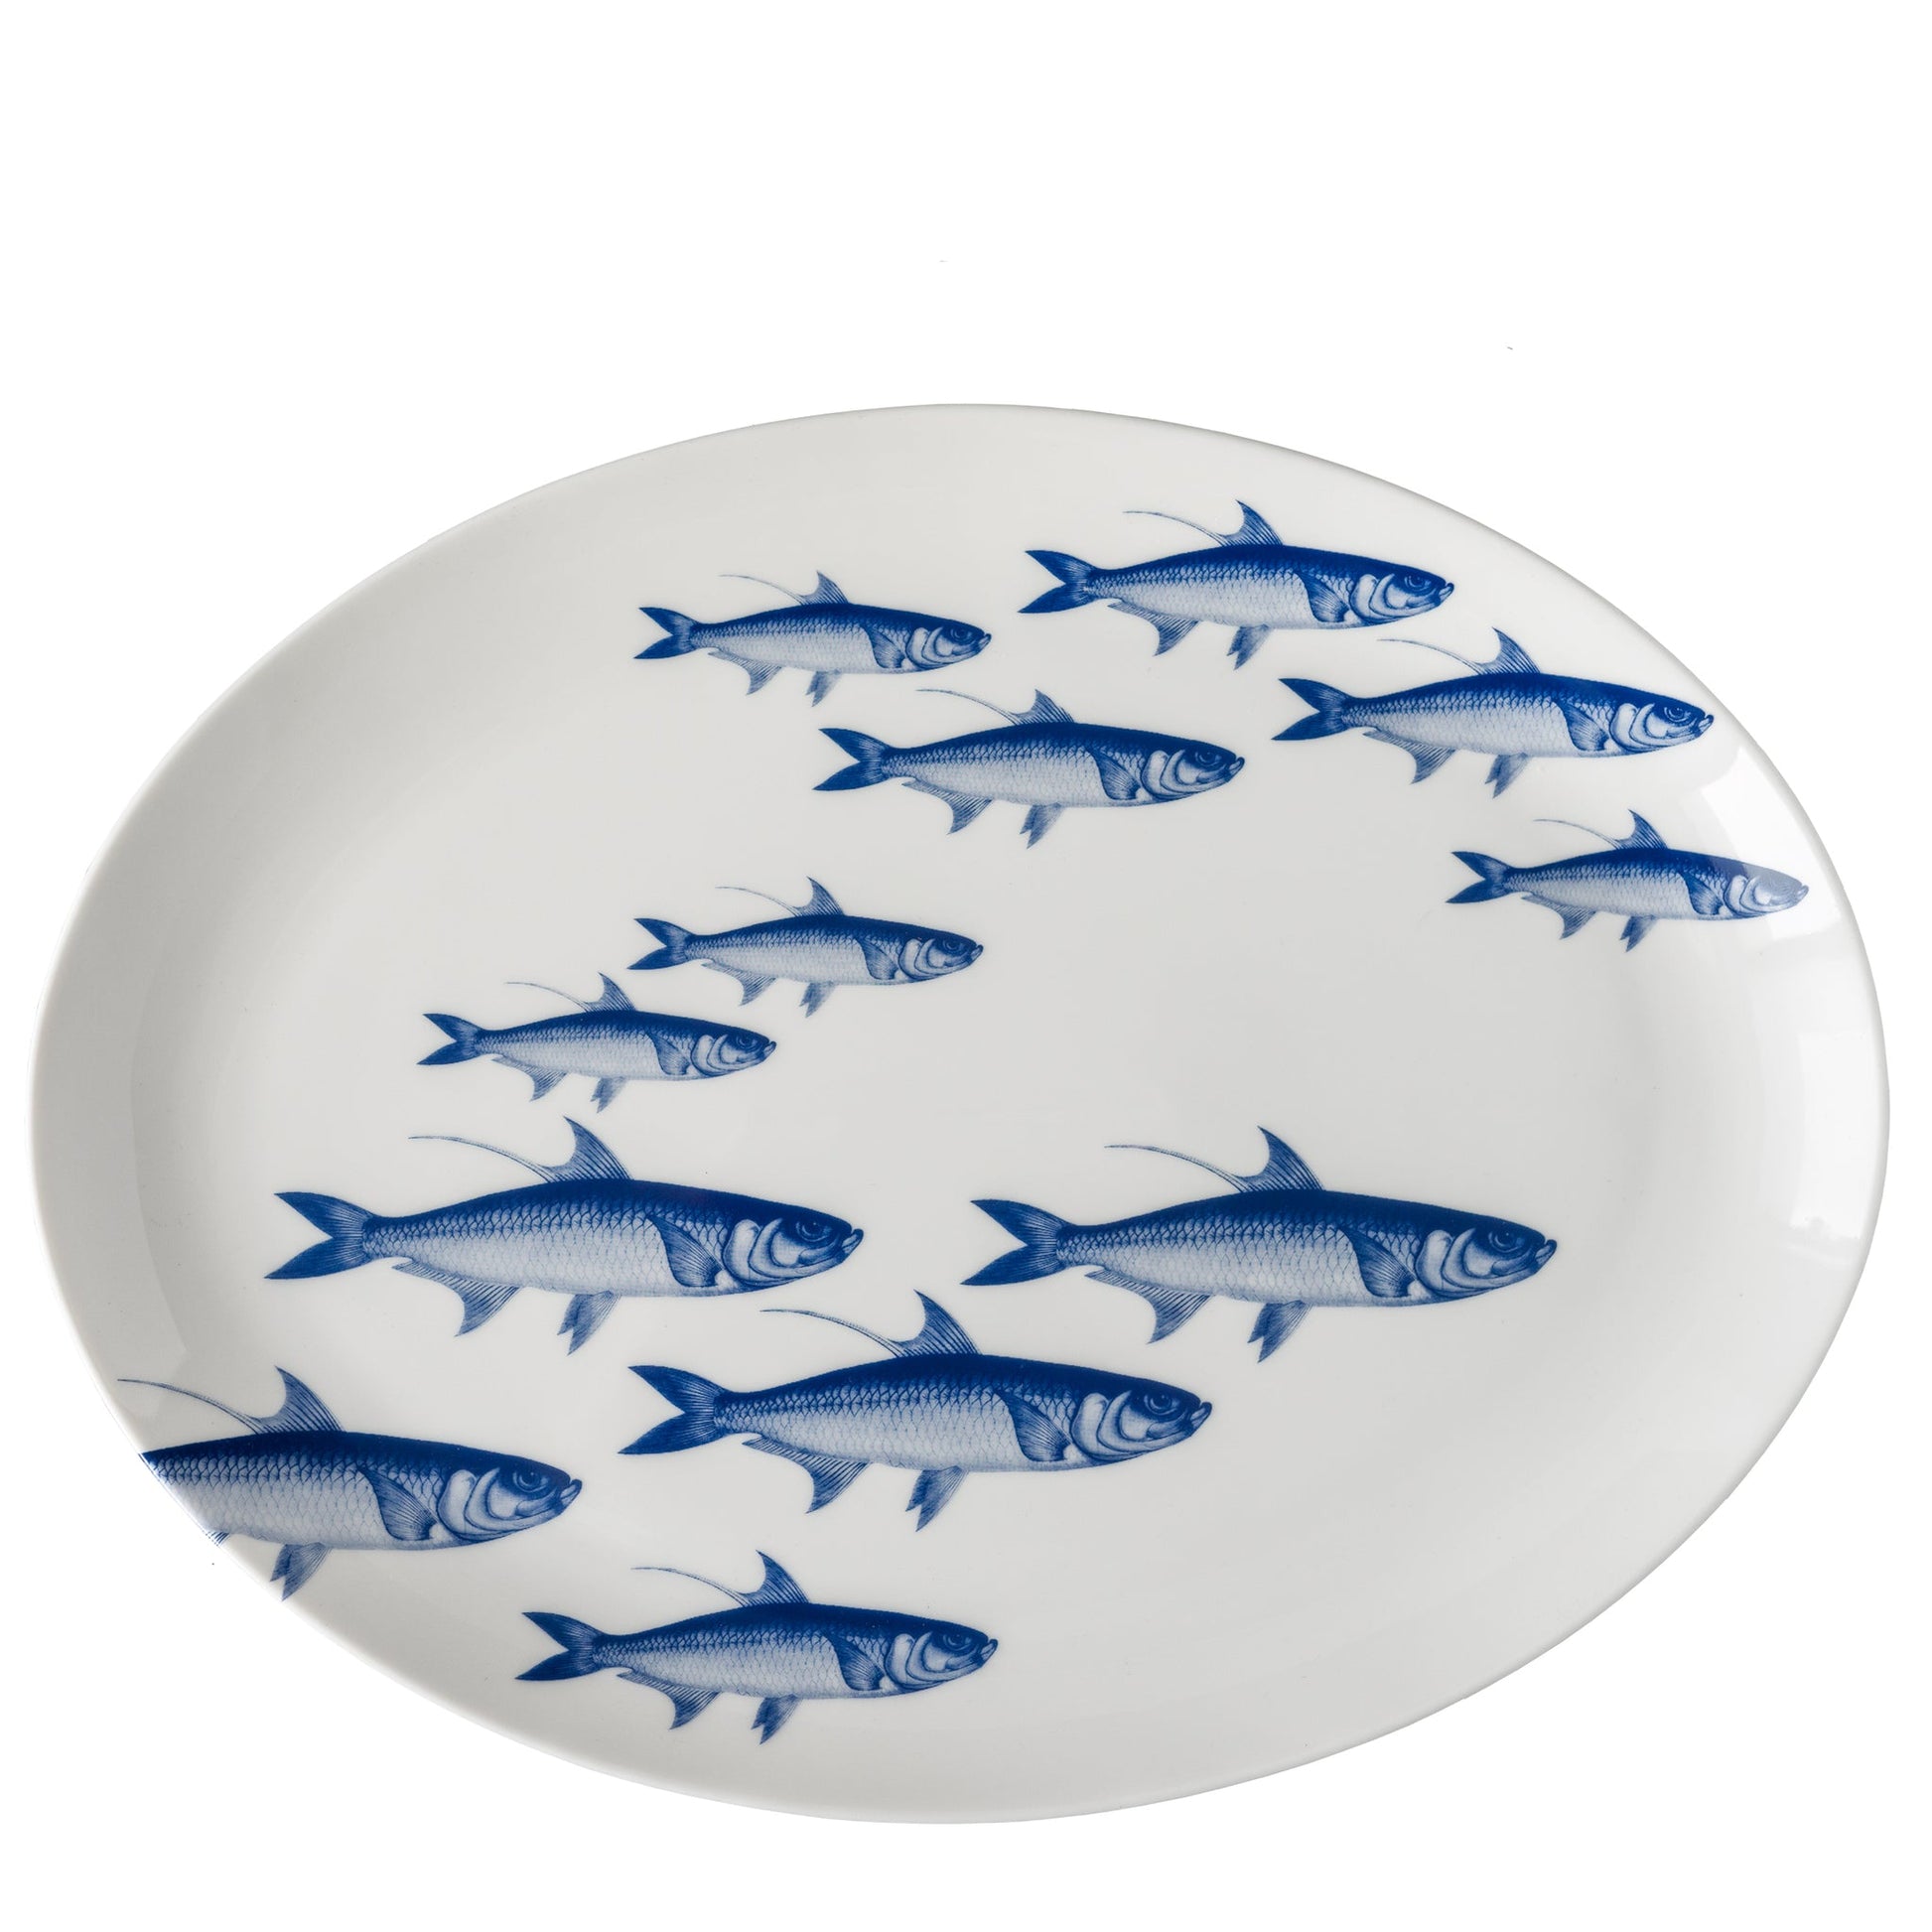 School of Fish Oval Platter-Nautical Decor and Gifts